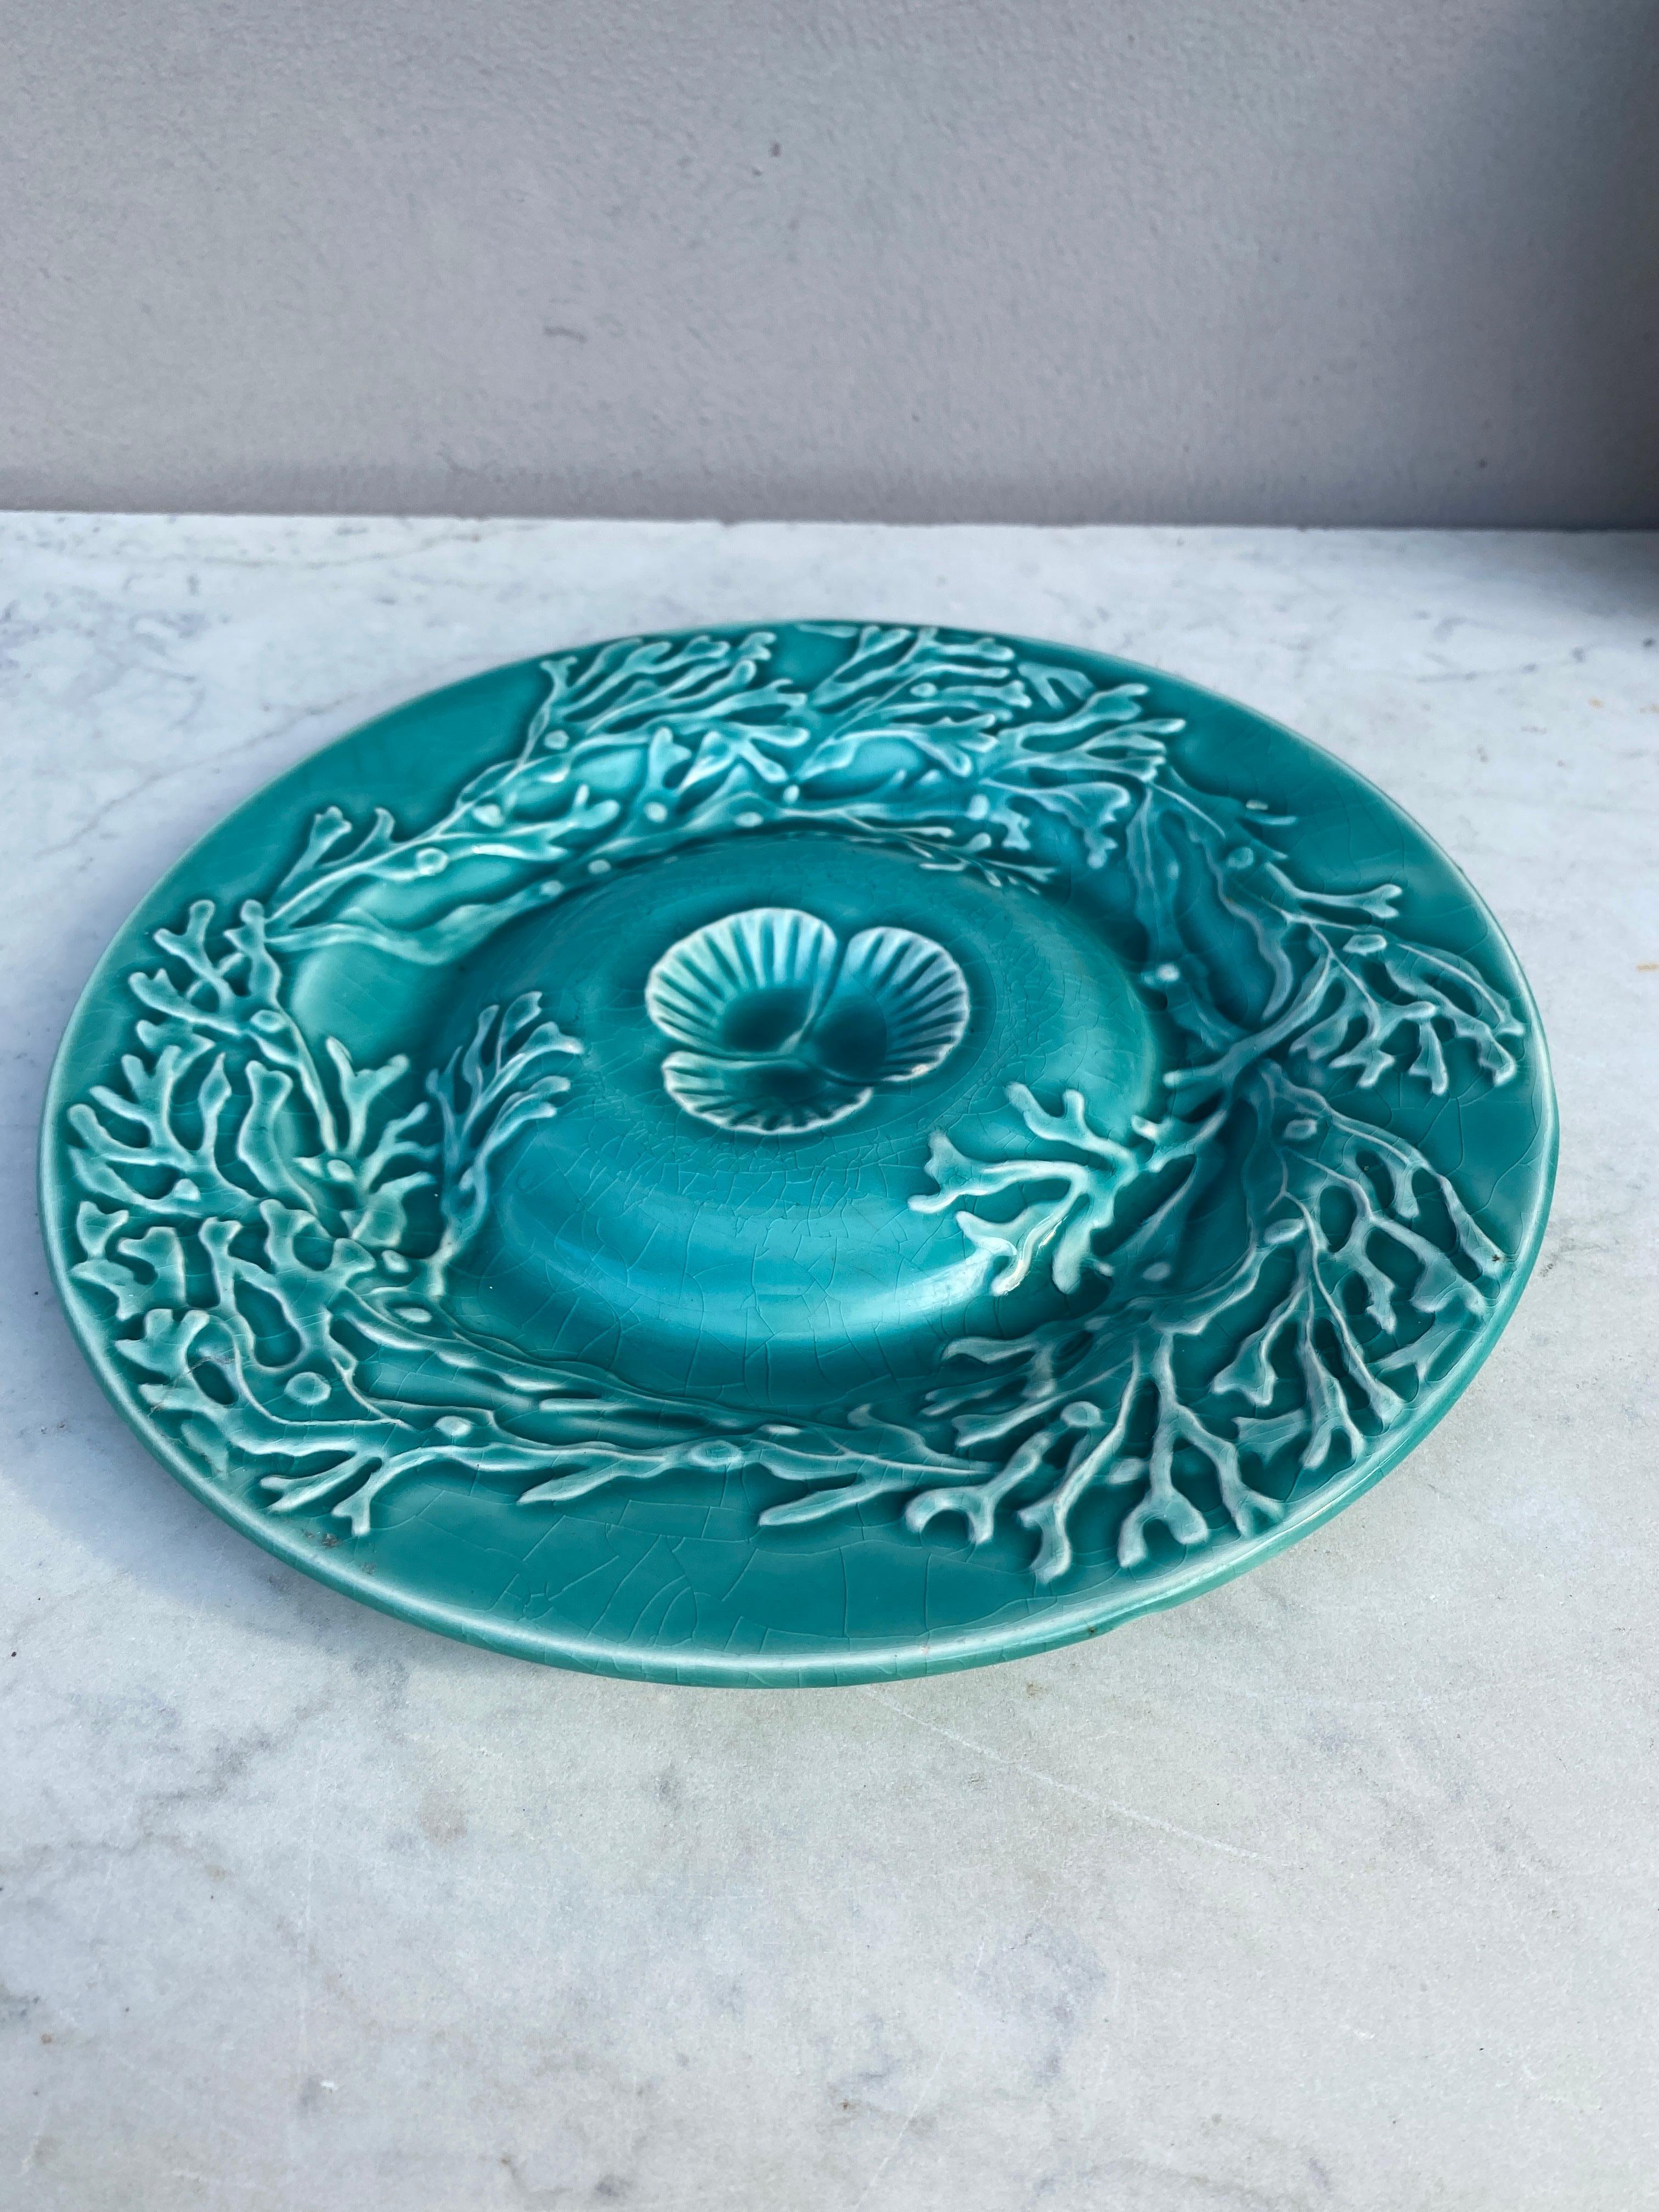 Majolica aqua turquoise shell plate with seaweeds signed Gien, circa 1890.
